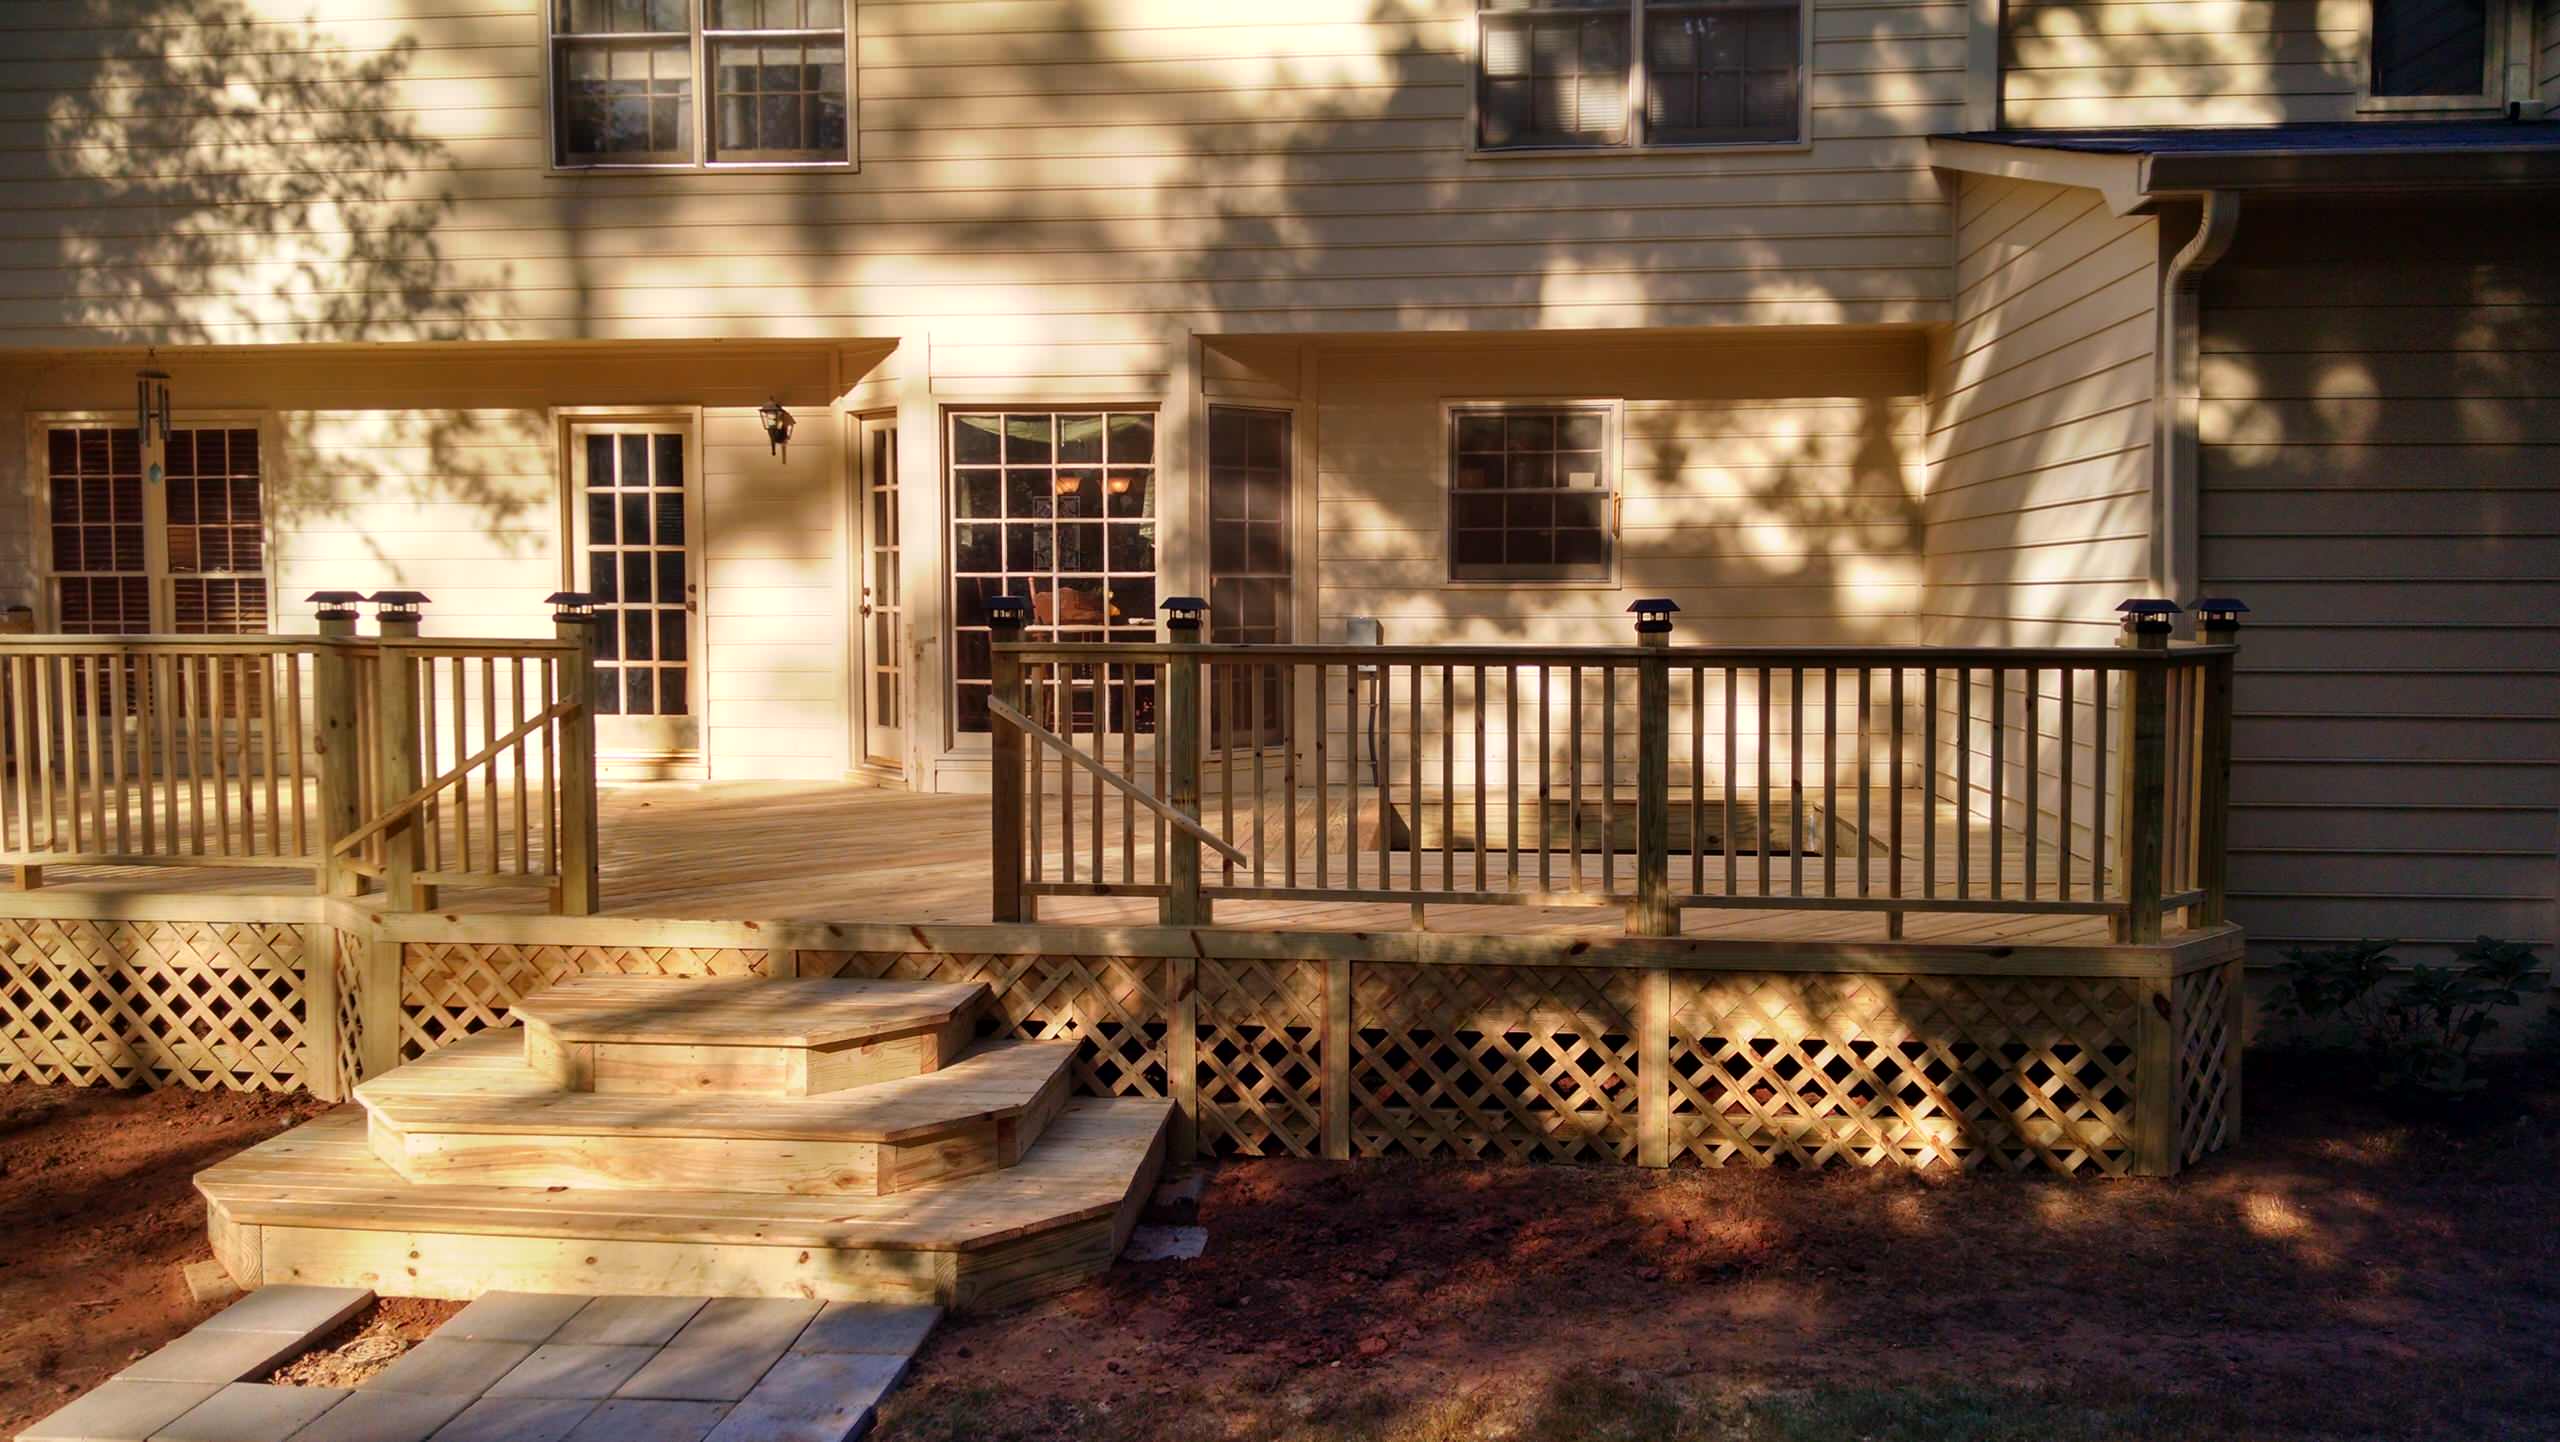 Exterior Remodeling